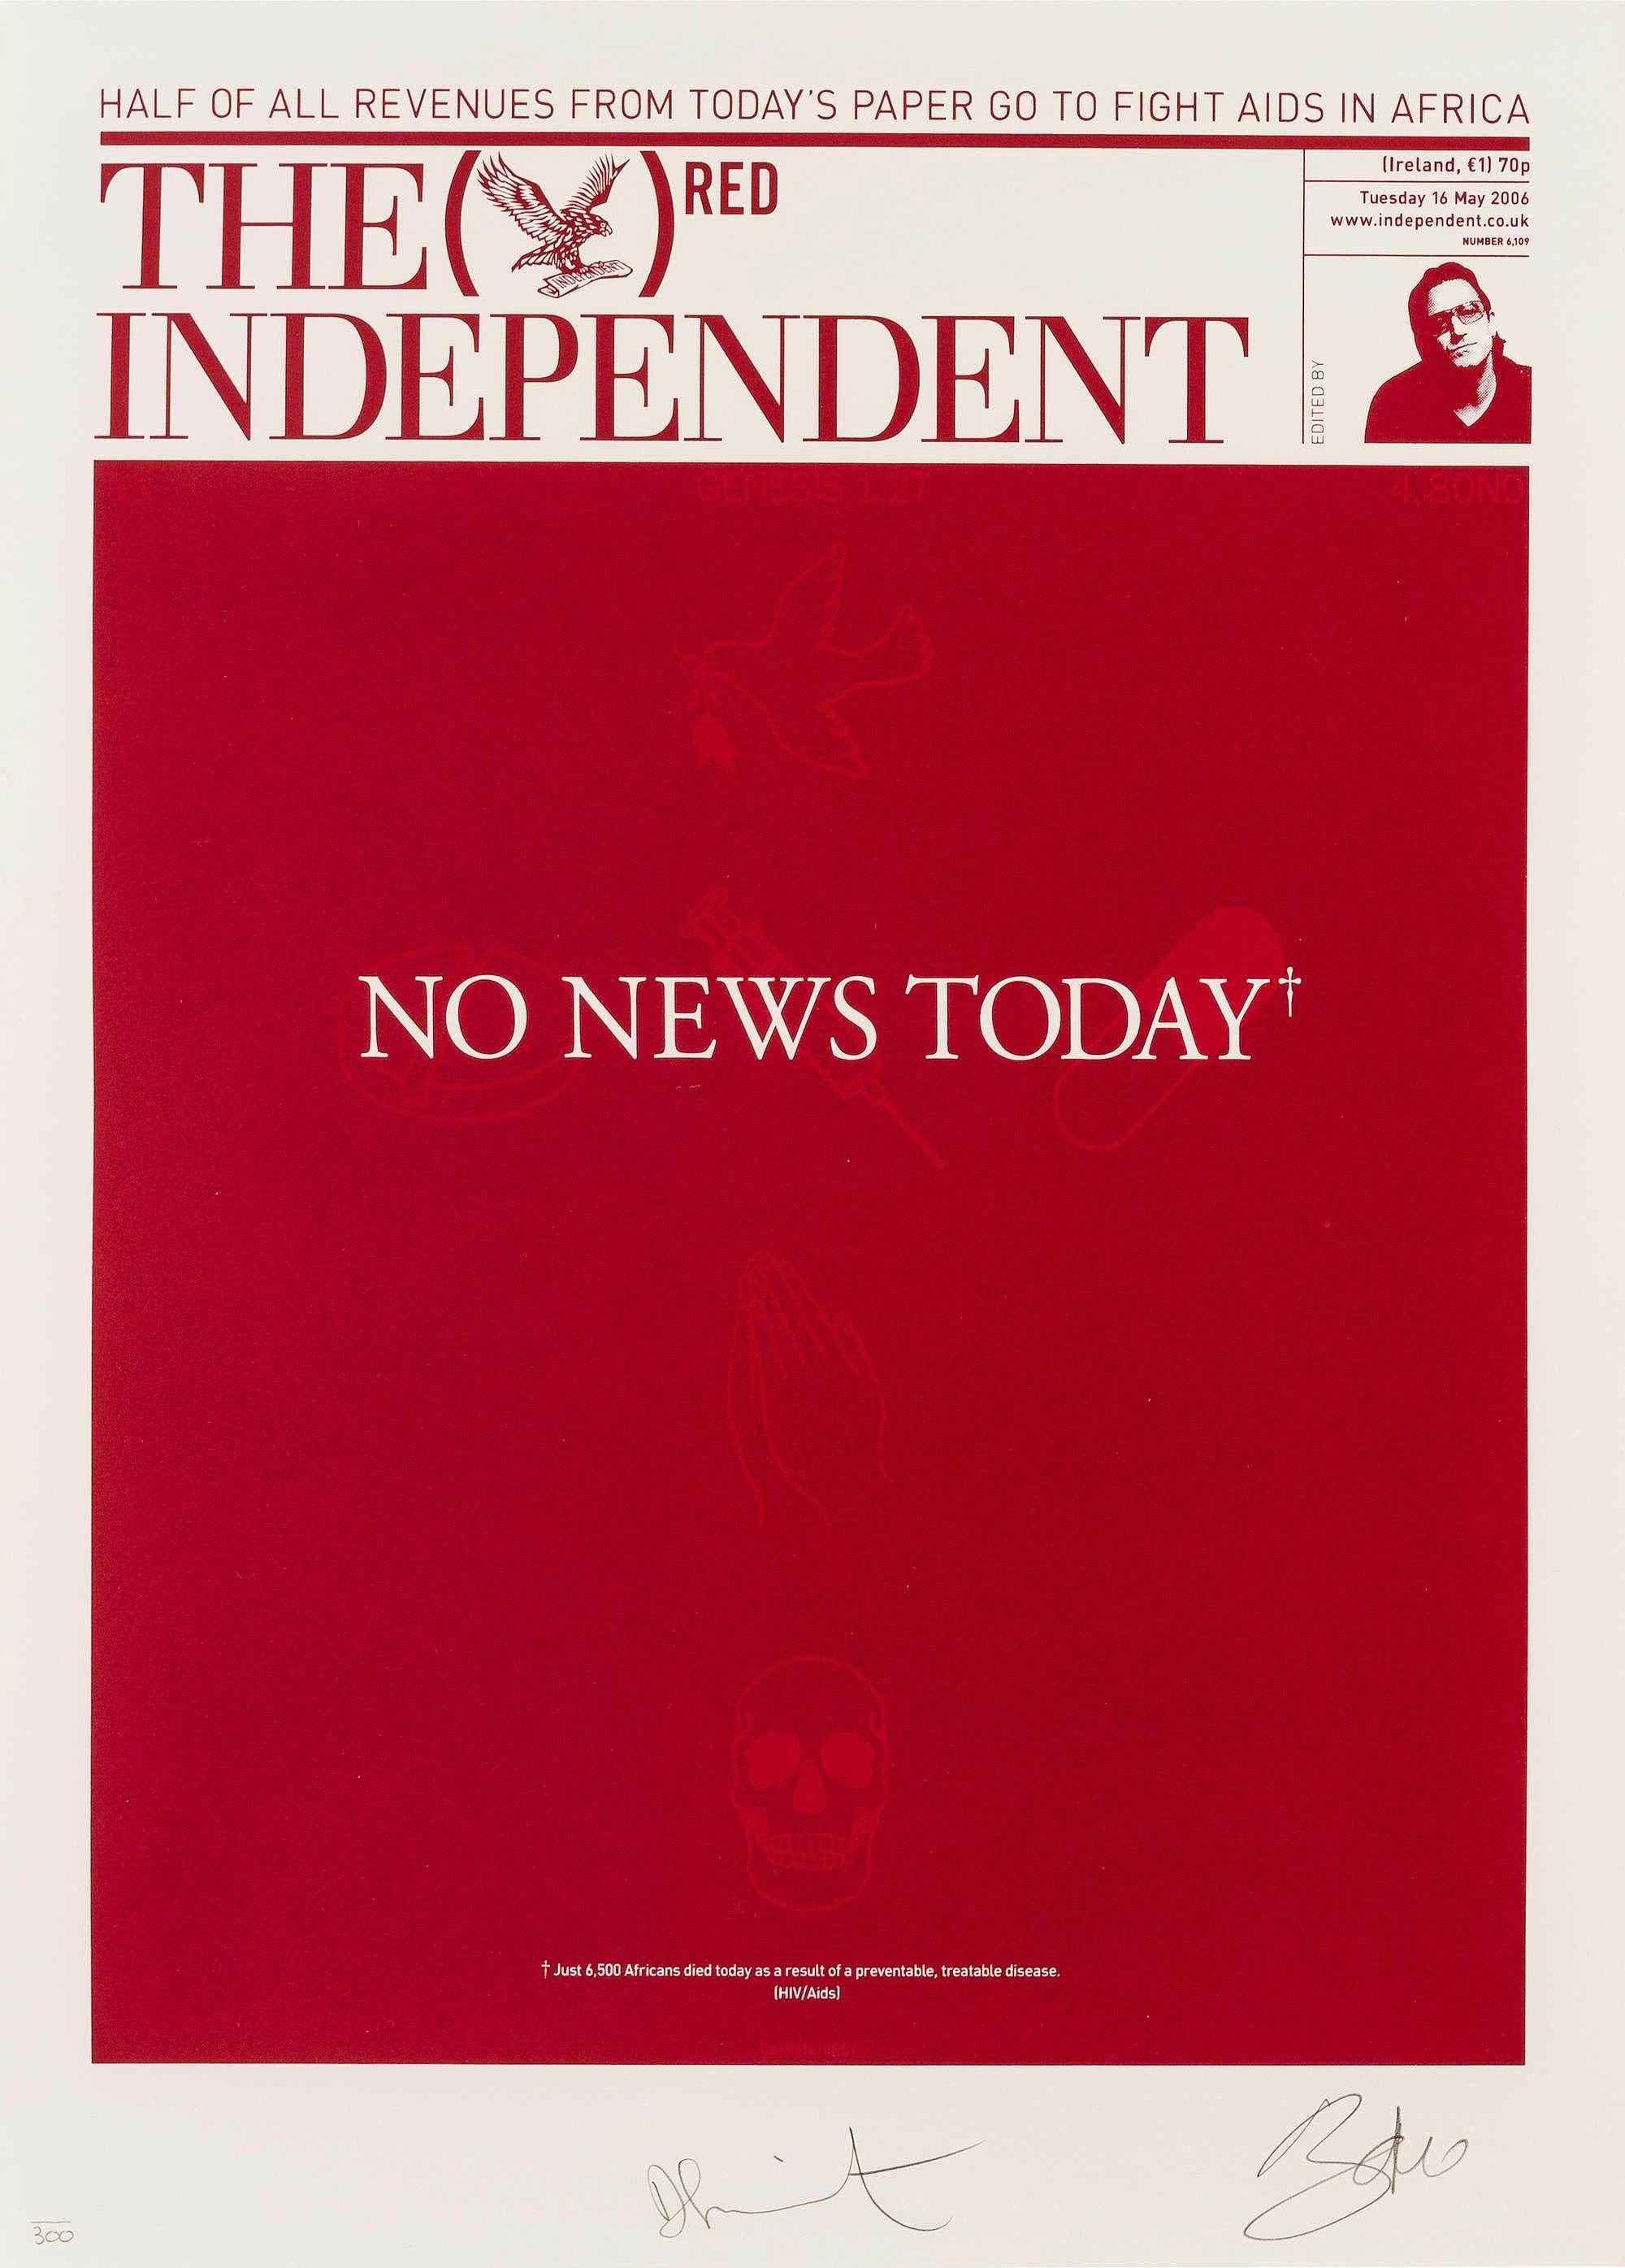 The Independent (RED) - No News Today - Art by Damien Hirst